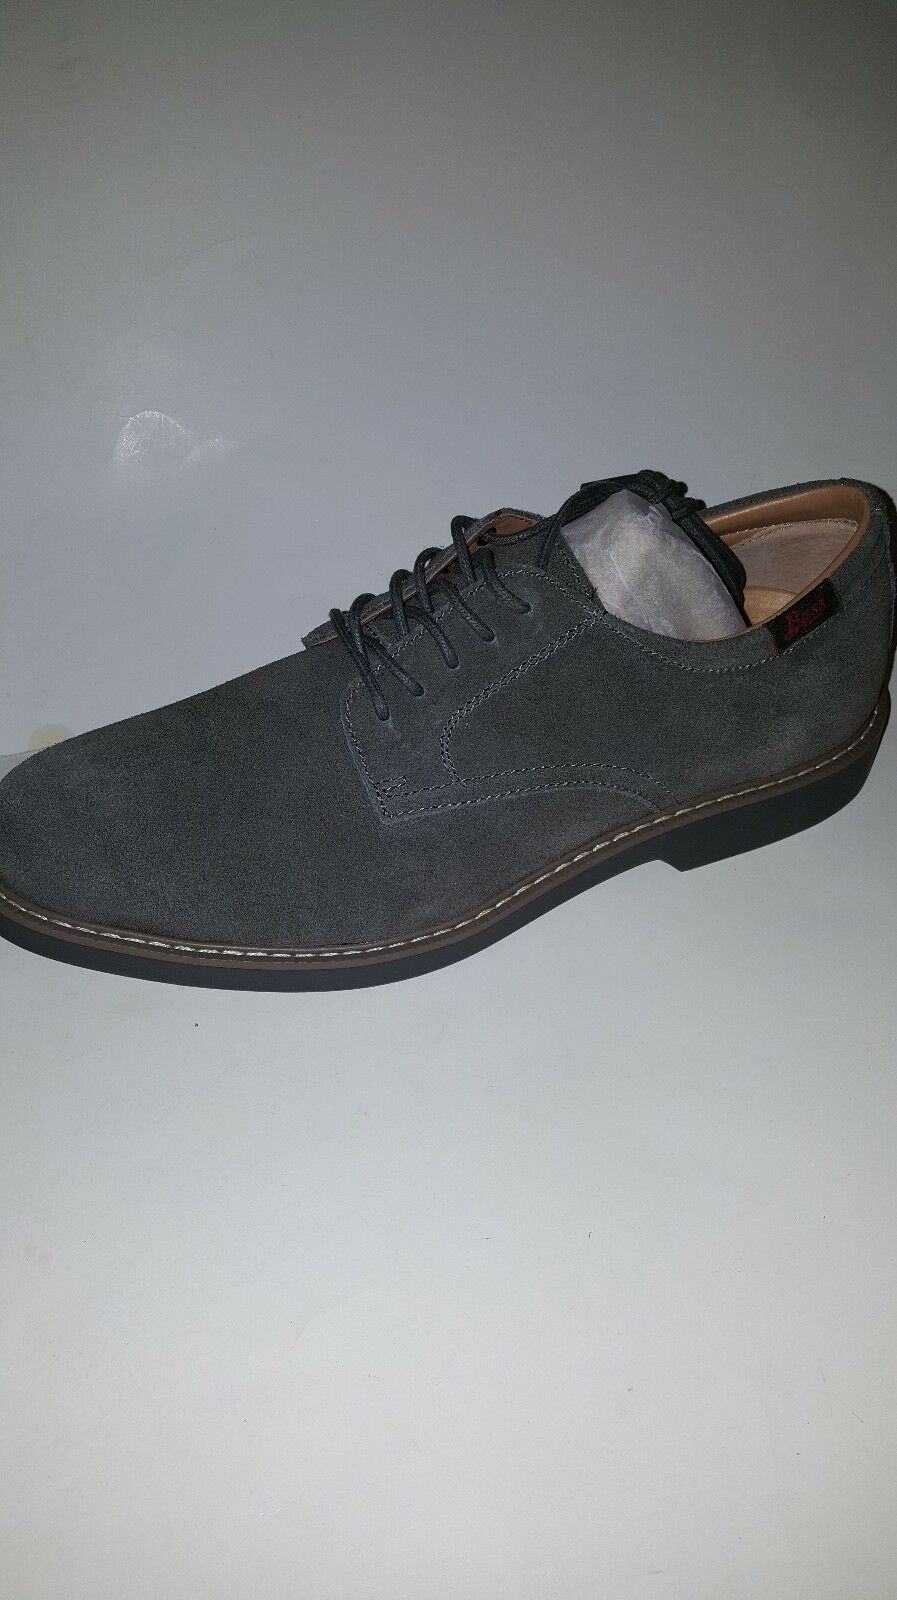 GH BASS PASADENA MEN'S OXFORD SHOES; LEATHER/ SUEDE/ GREY/00261915010 ...